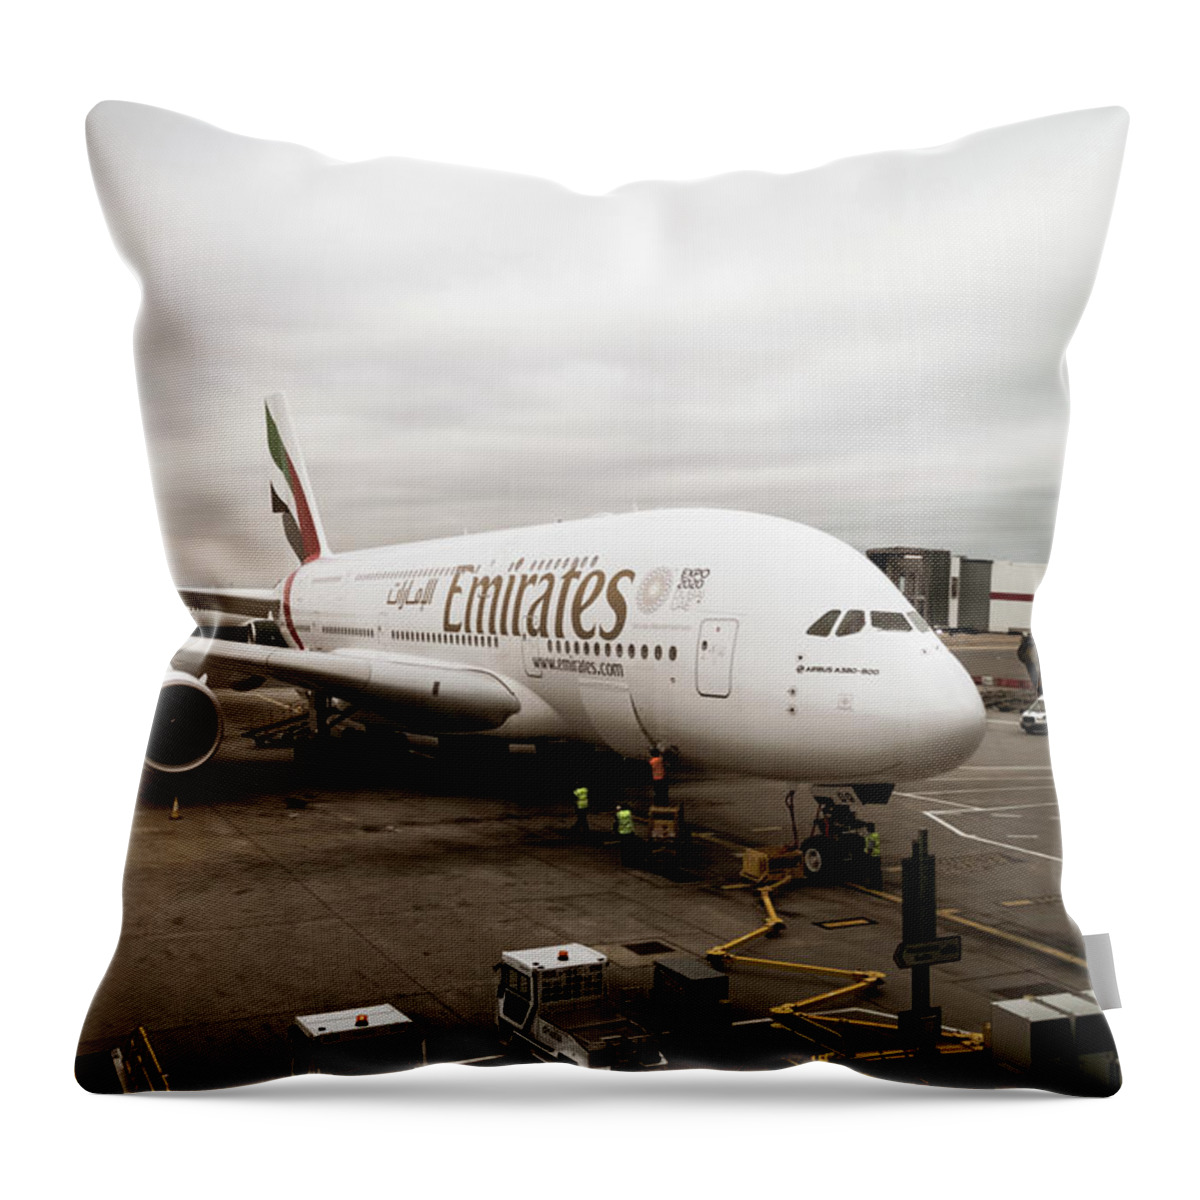 #flying Throw Pillow featuring the photograph Aircraft Emirates by Angela Carrion Photography